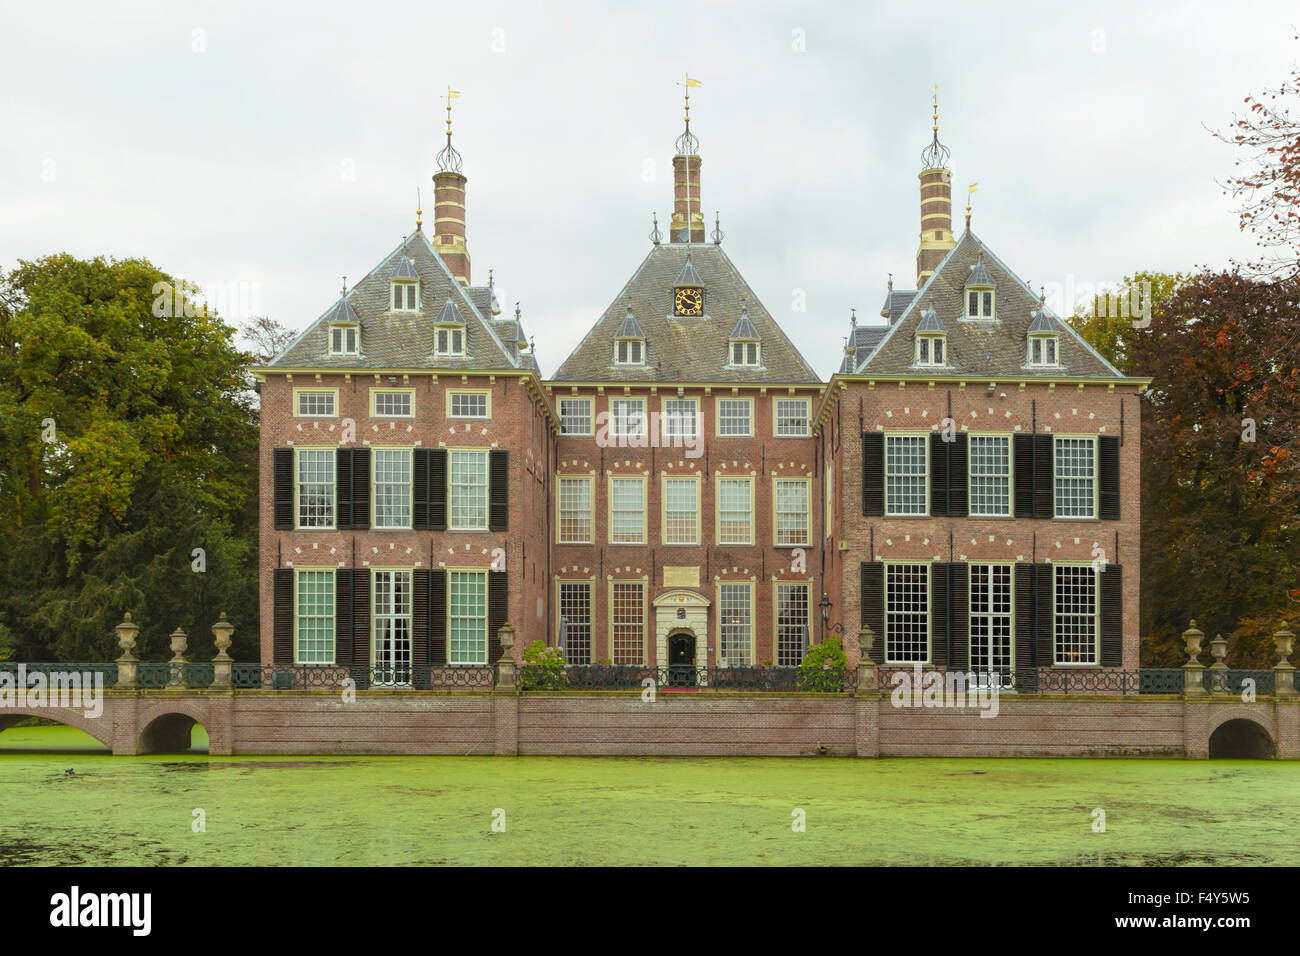 Front view of Duivenvoorde Castle, Voorschoten, South Holland, The Netherlands. Build in 1631 and with an English landscape park Stock Photo